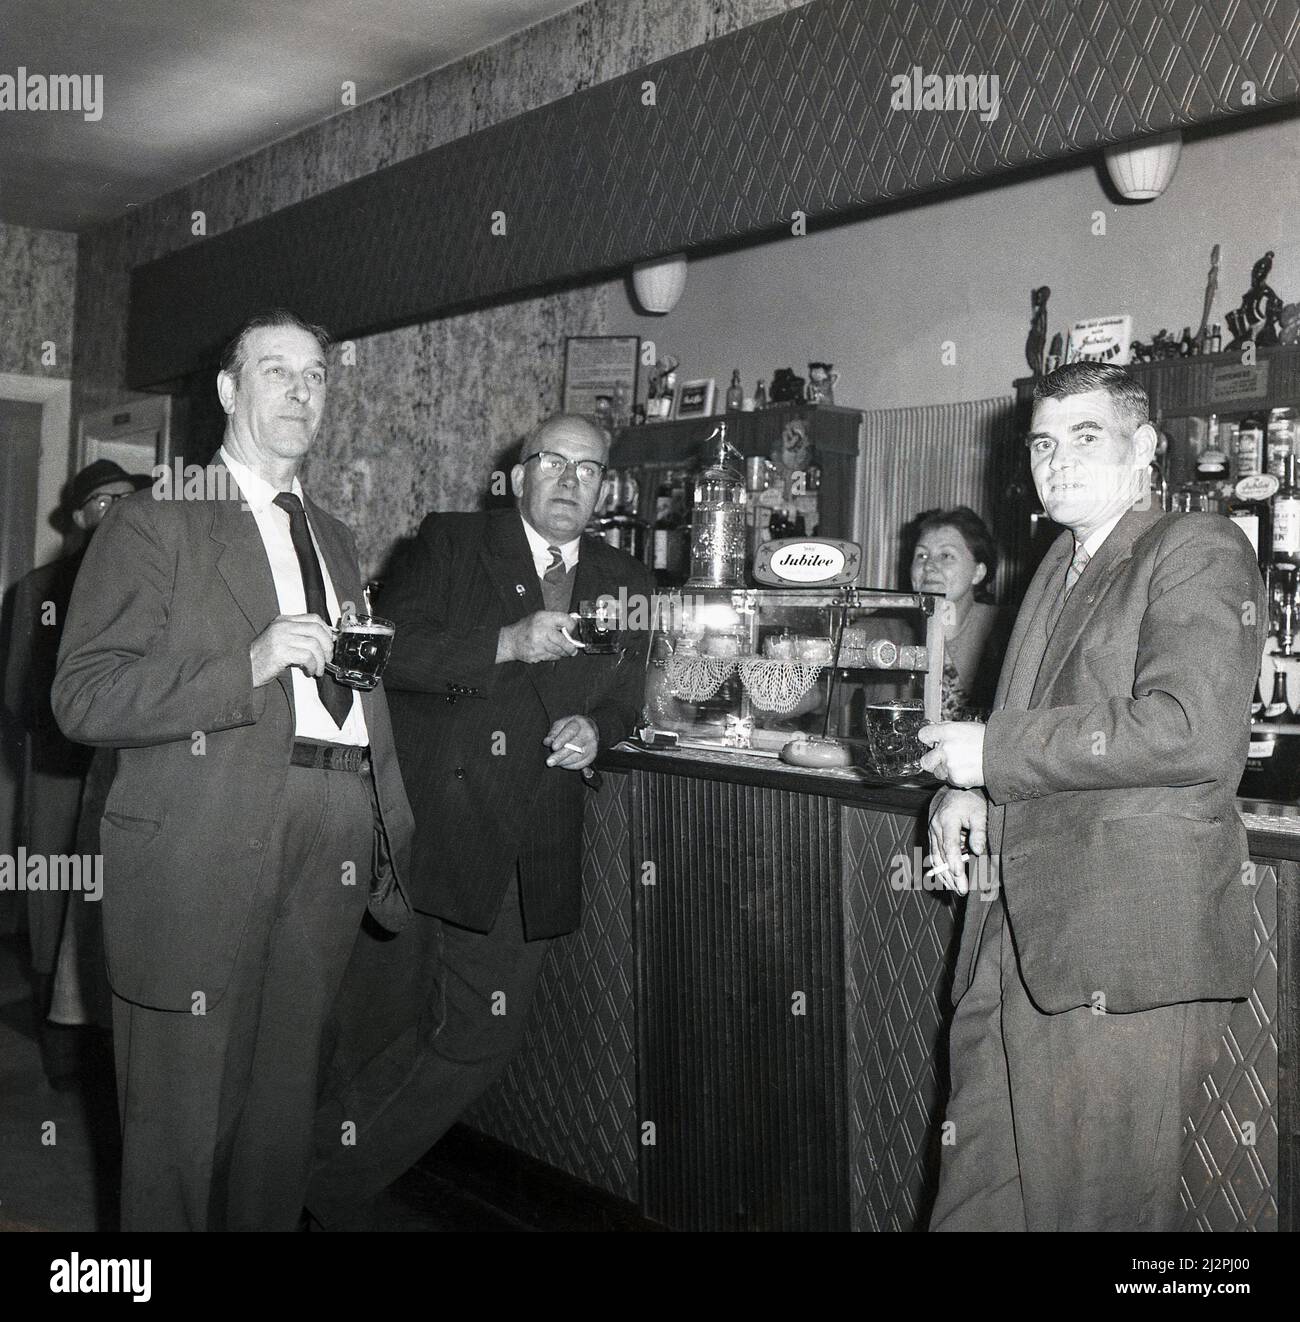 1963, historical, three me standing having a drink - and a smoke - at a bar, Stockport, Manchester, England, UK. Glass case on the bar with pork pies and sign for the Jubliee beer brand, most famously a Jubliee Stout. Jubliee beer was brewed by Hope and Anchor of Sheffield, who merged in 1962 with the Charington brewery of Mile End, London. Stock Photo